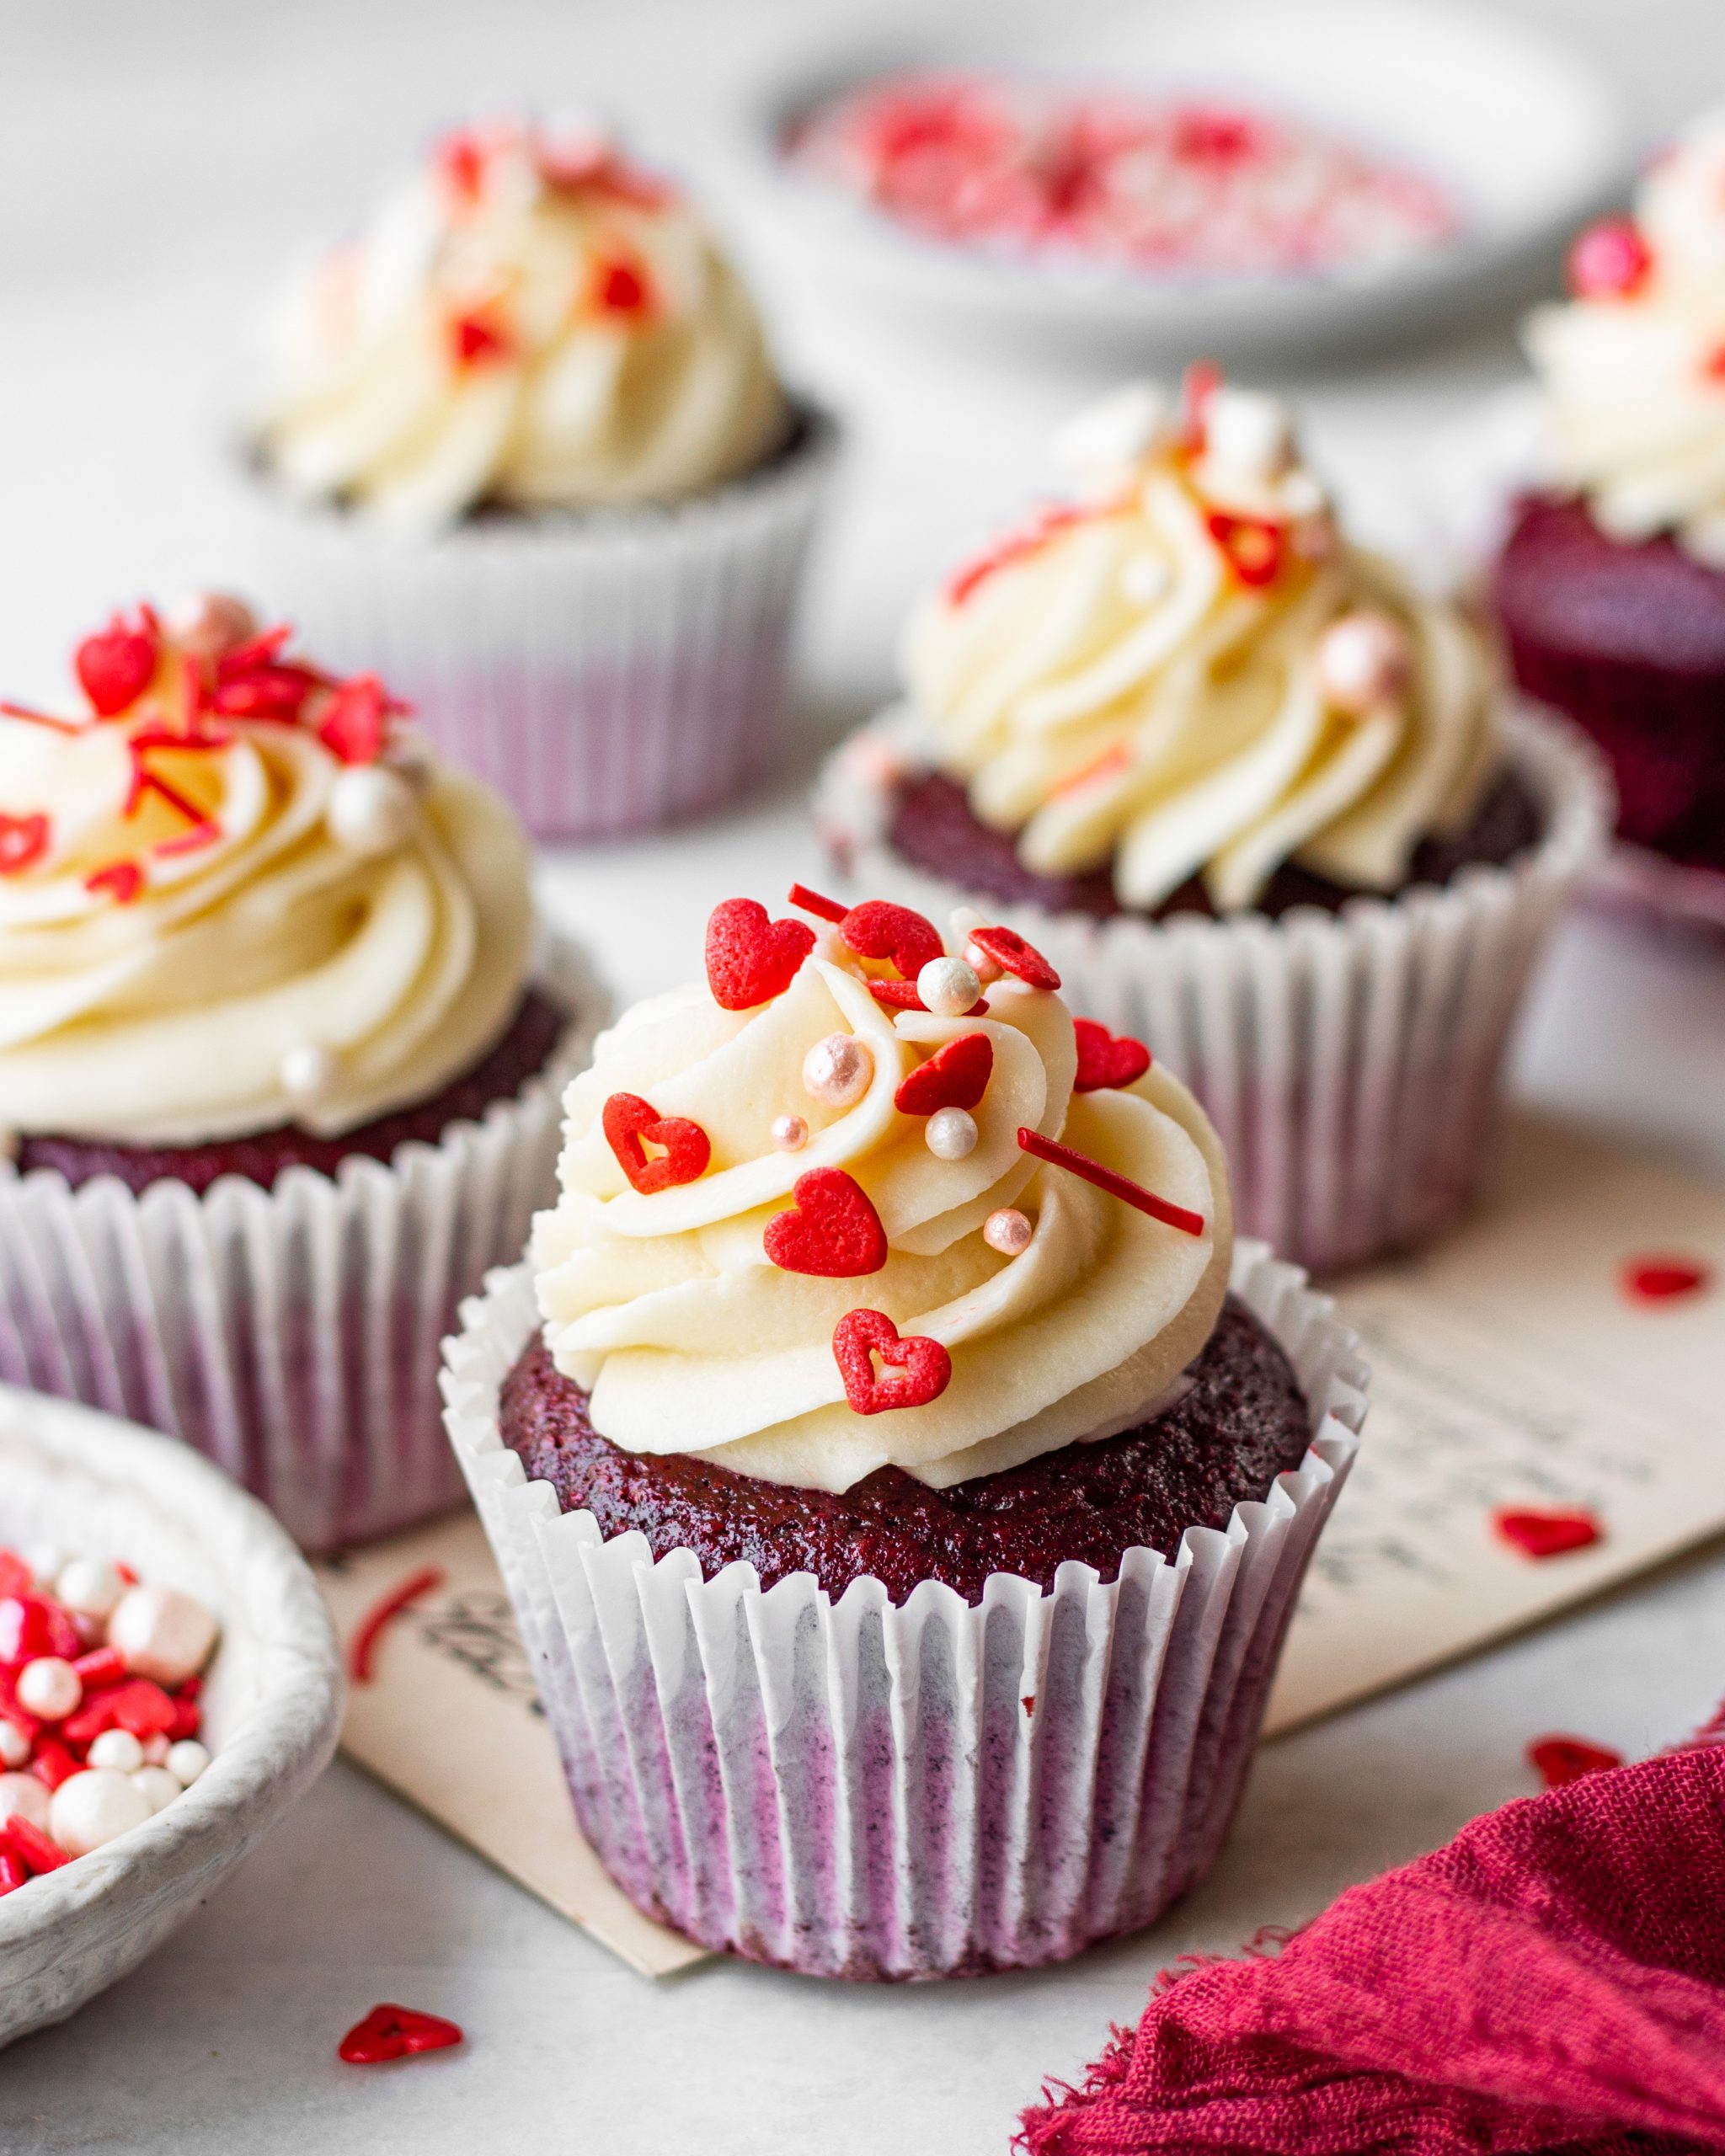 Red velvet cupcakes - valentine's special - Bake with Shivesh